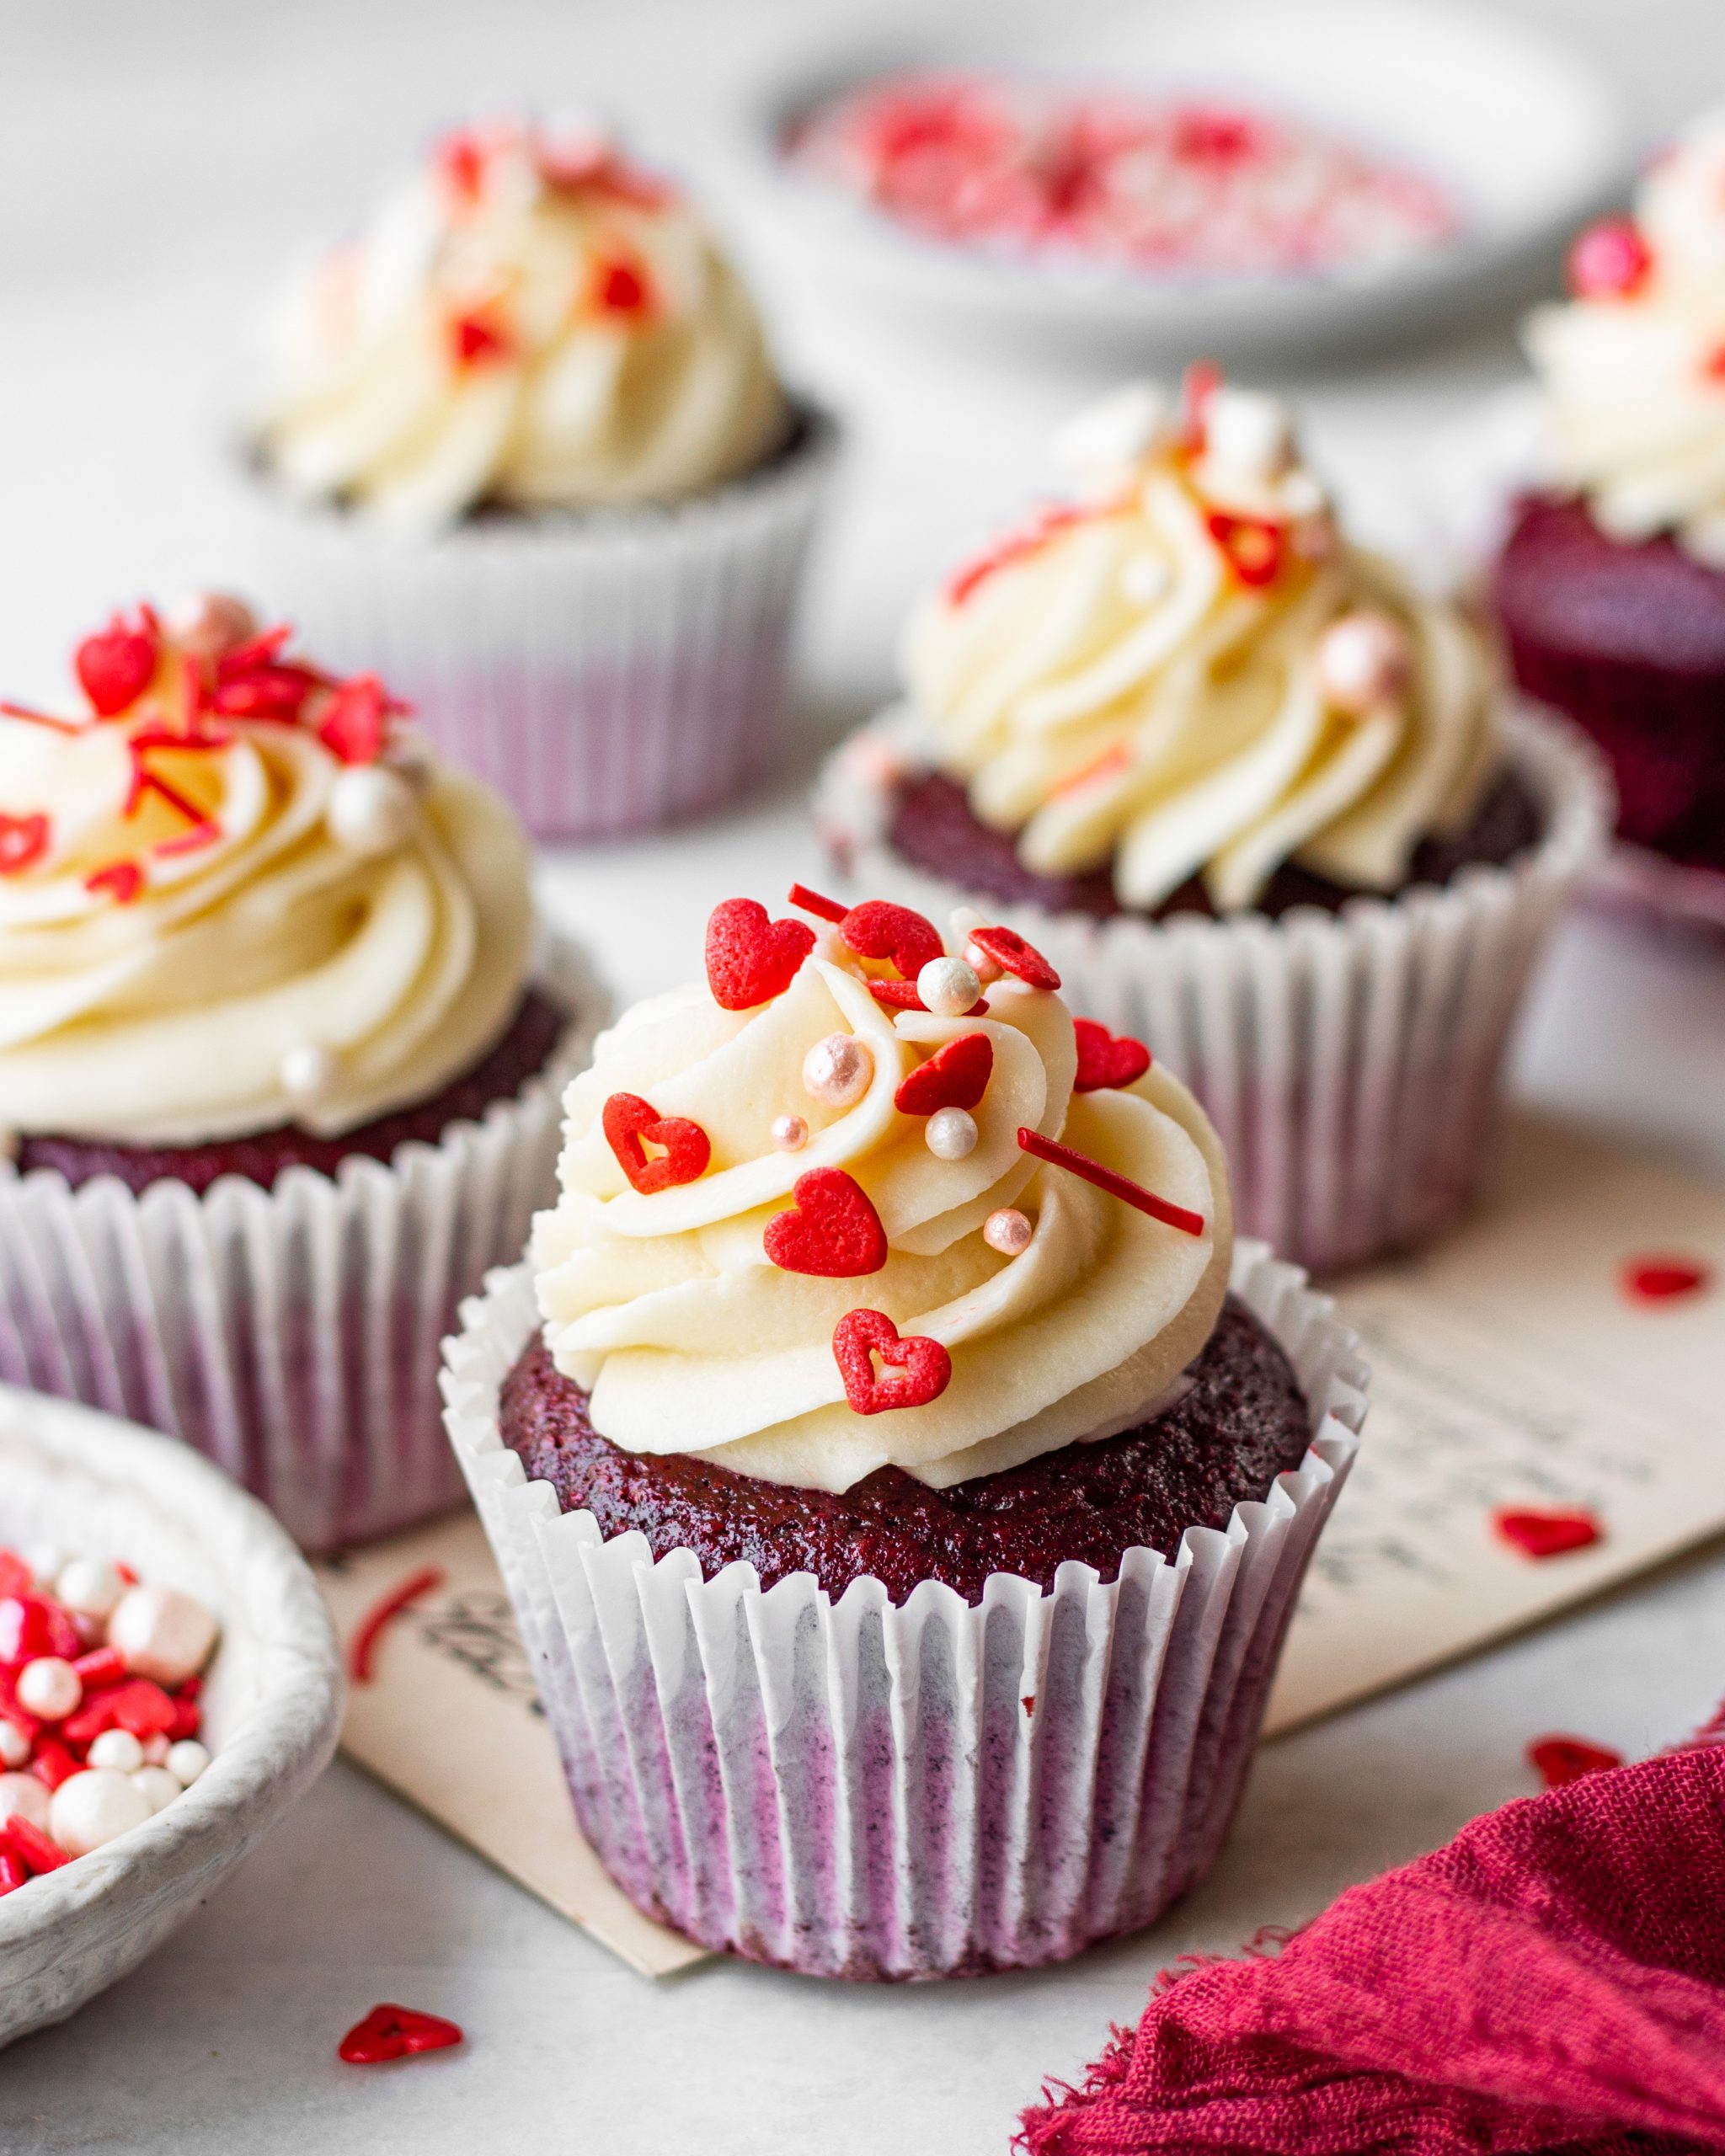 Red velvet cupcakes - valentine's special - Bake with Shivesh